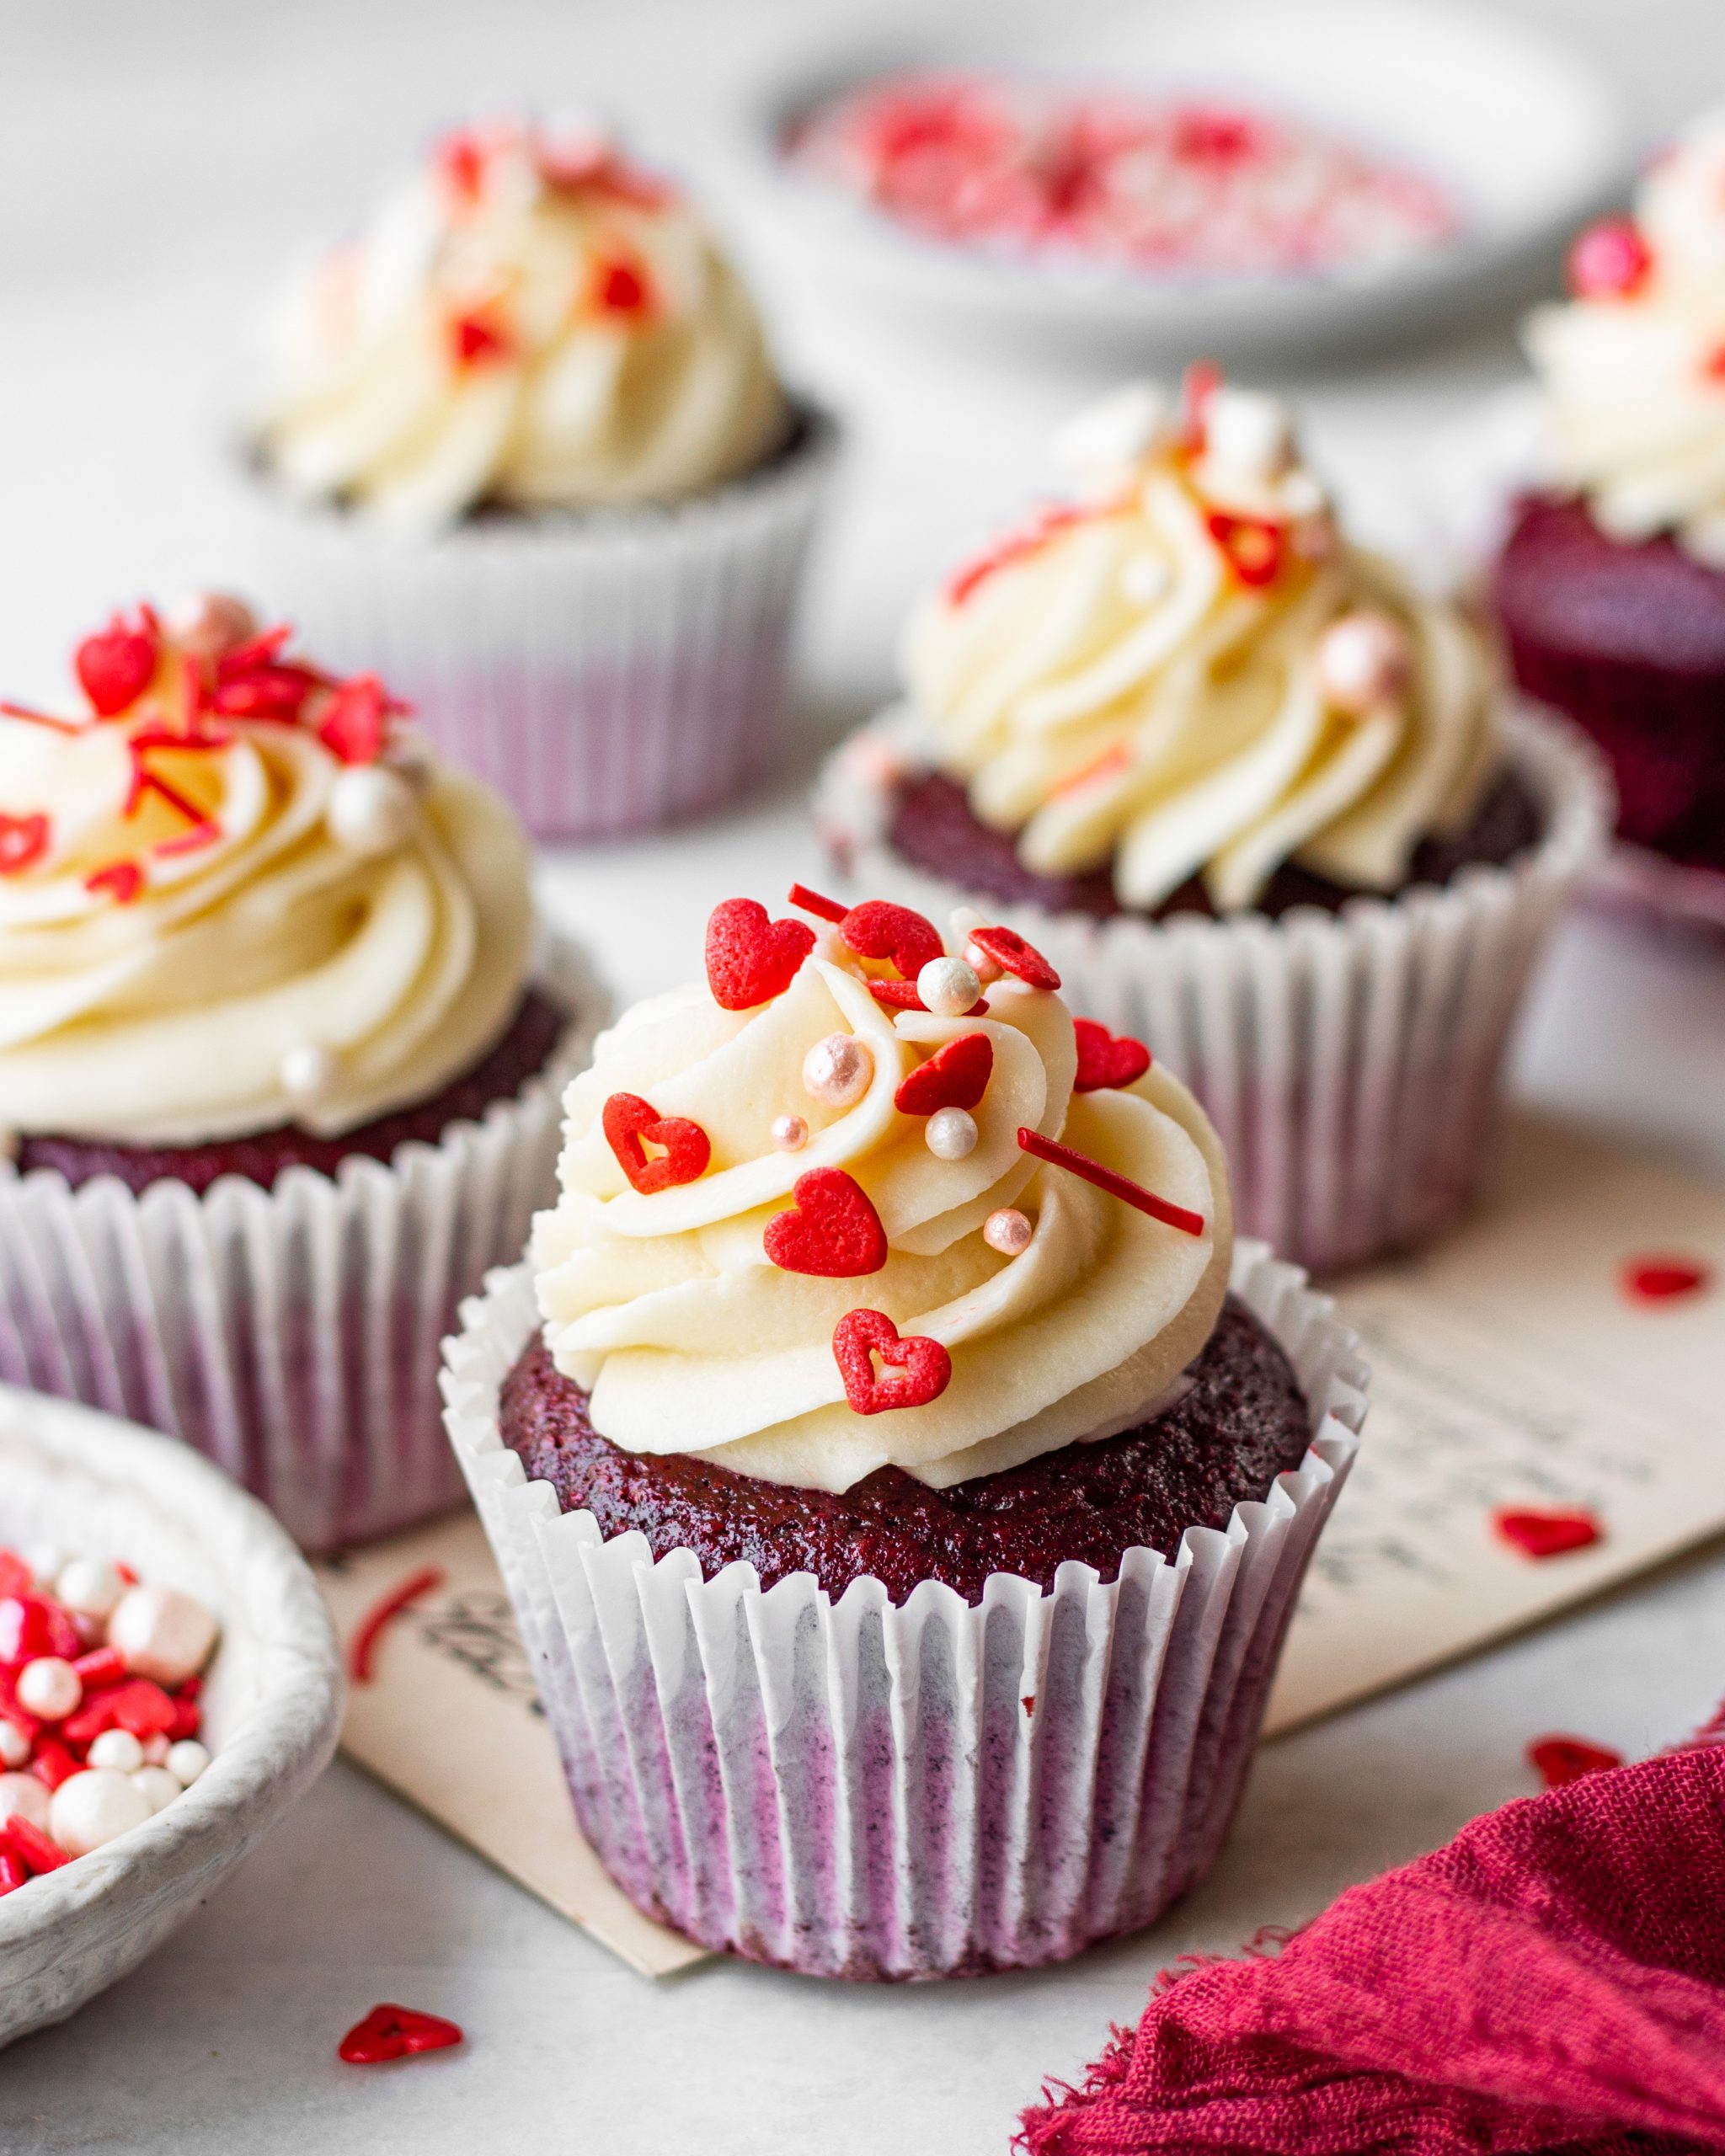 Red velvet cupcakes - valentine's special - Bake with Shivesh